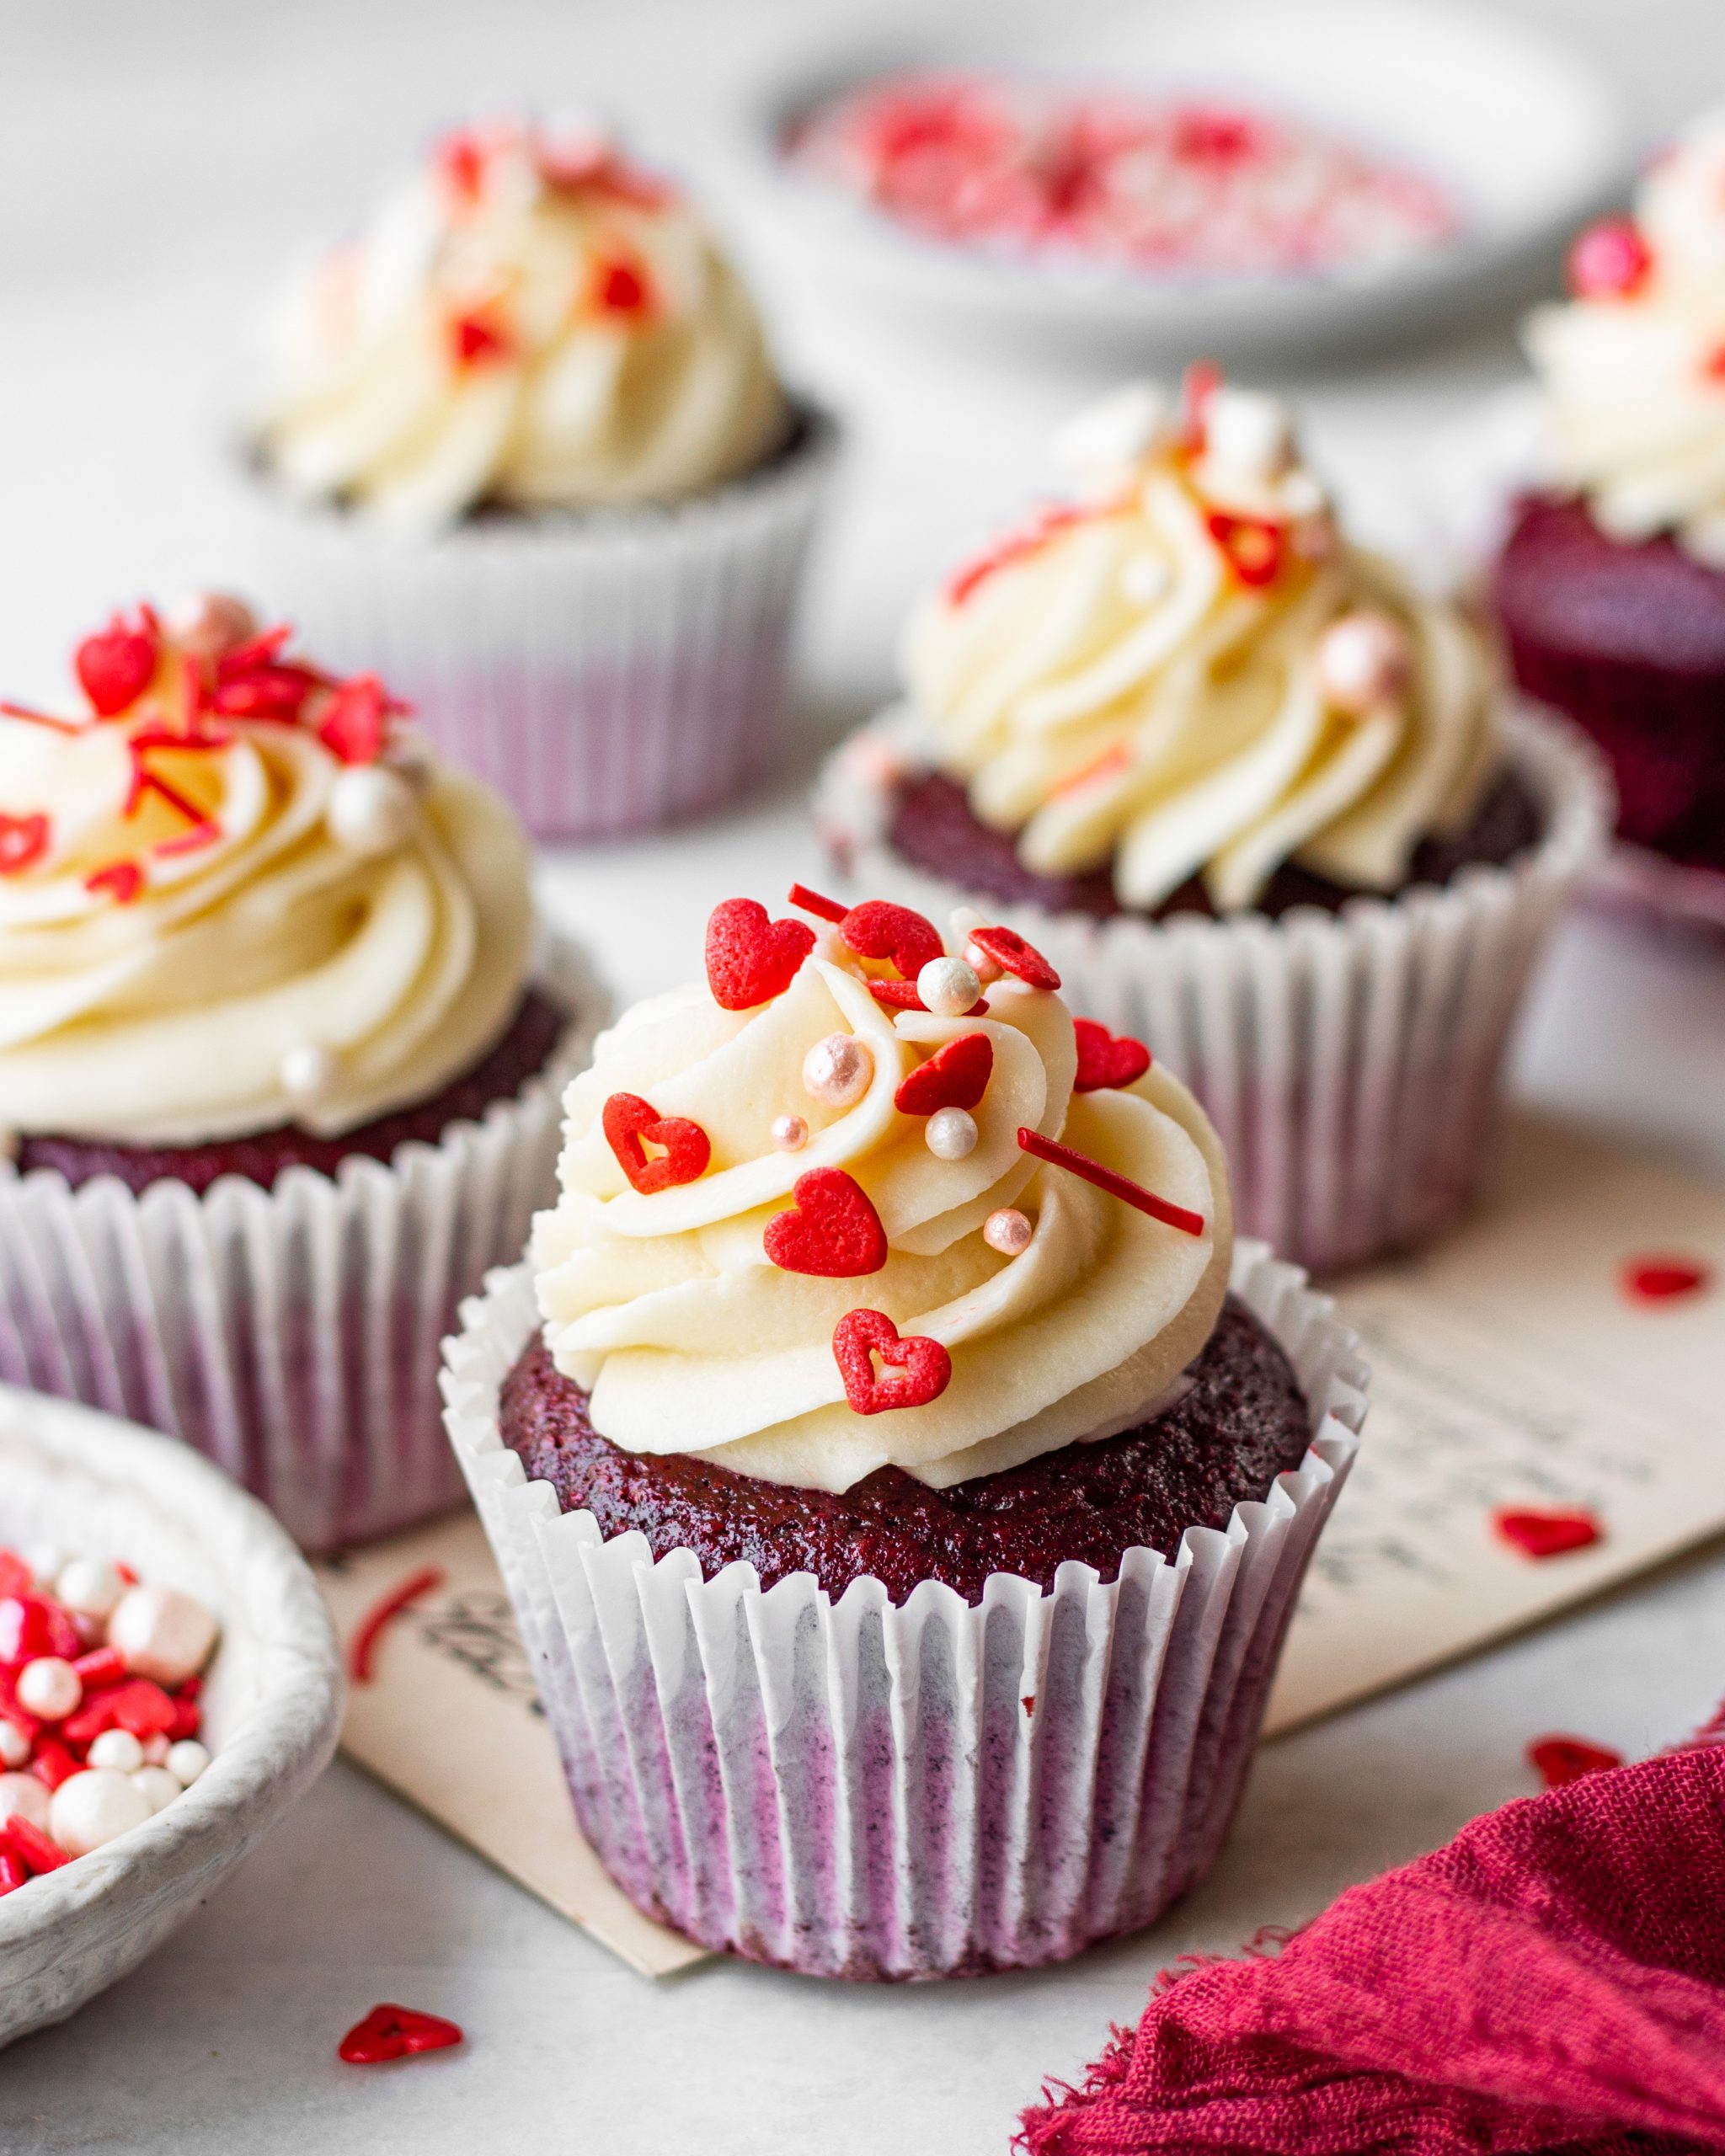 Red velvet cupcakes - valentine's special - Bake with Shivesh